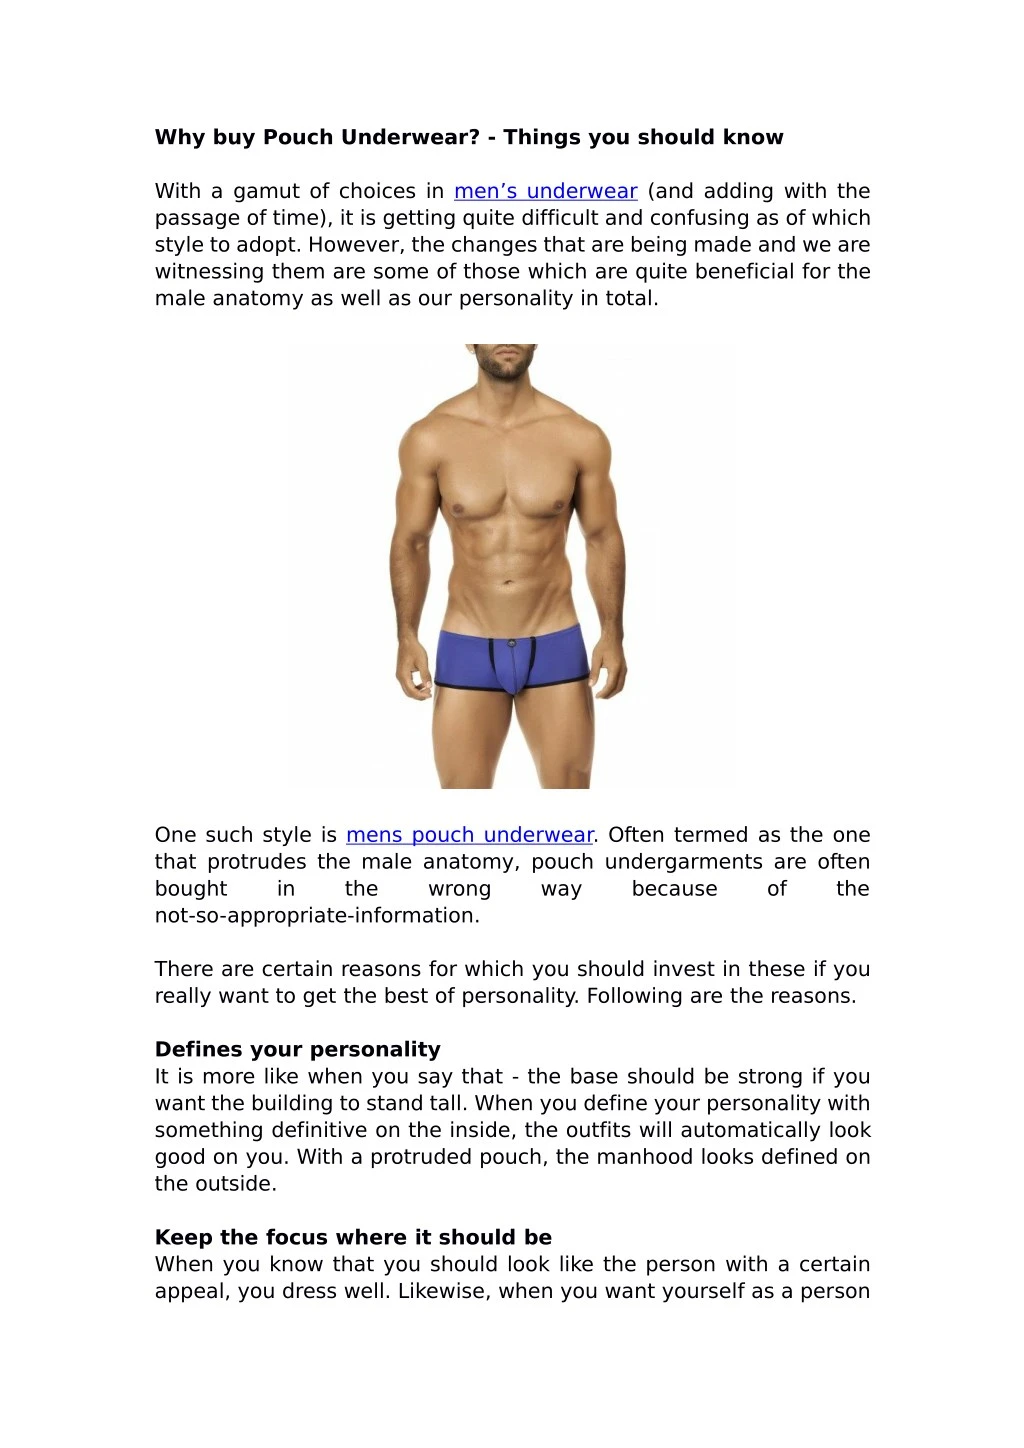 why buy pouch underwear things you should know